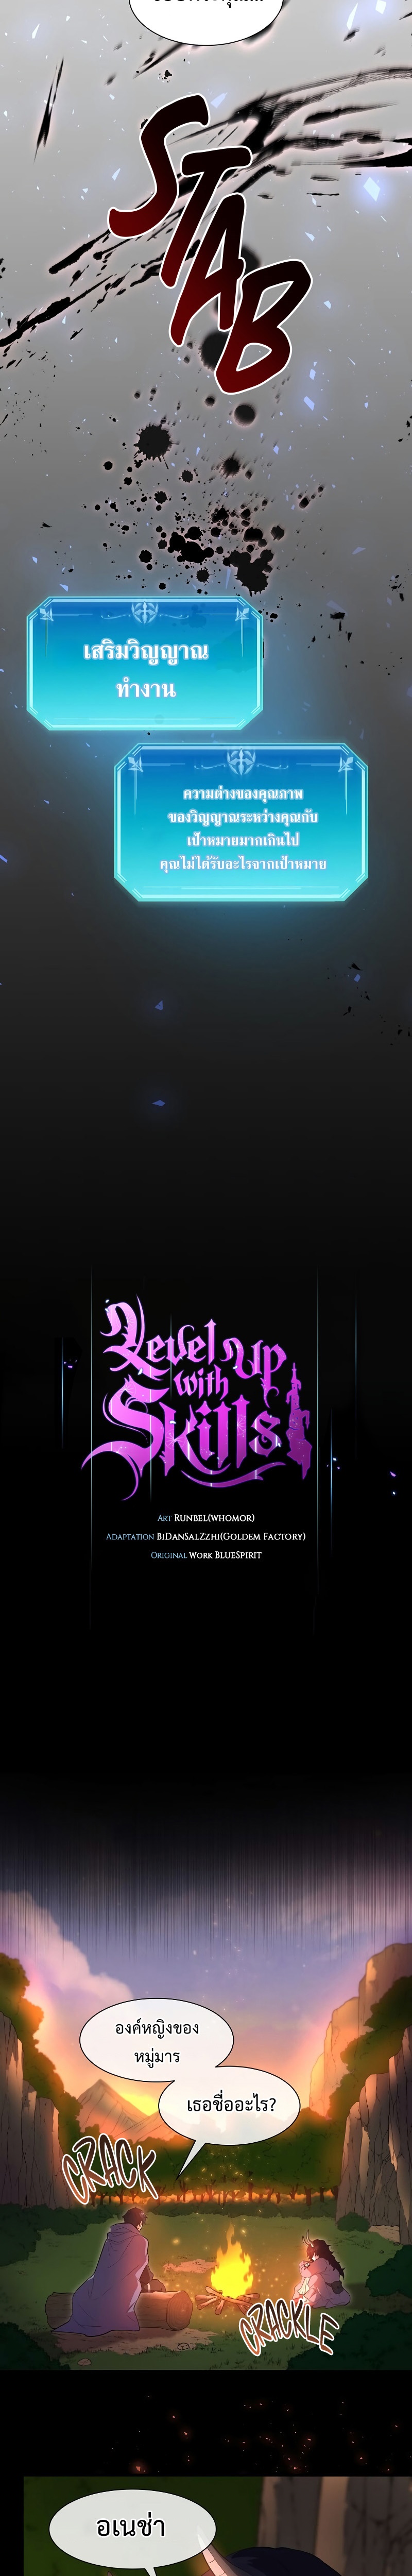 Level Up with Skills 64 (2) 002